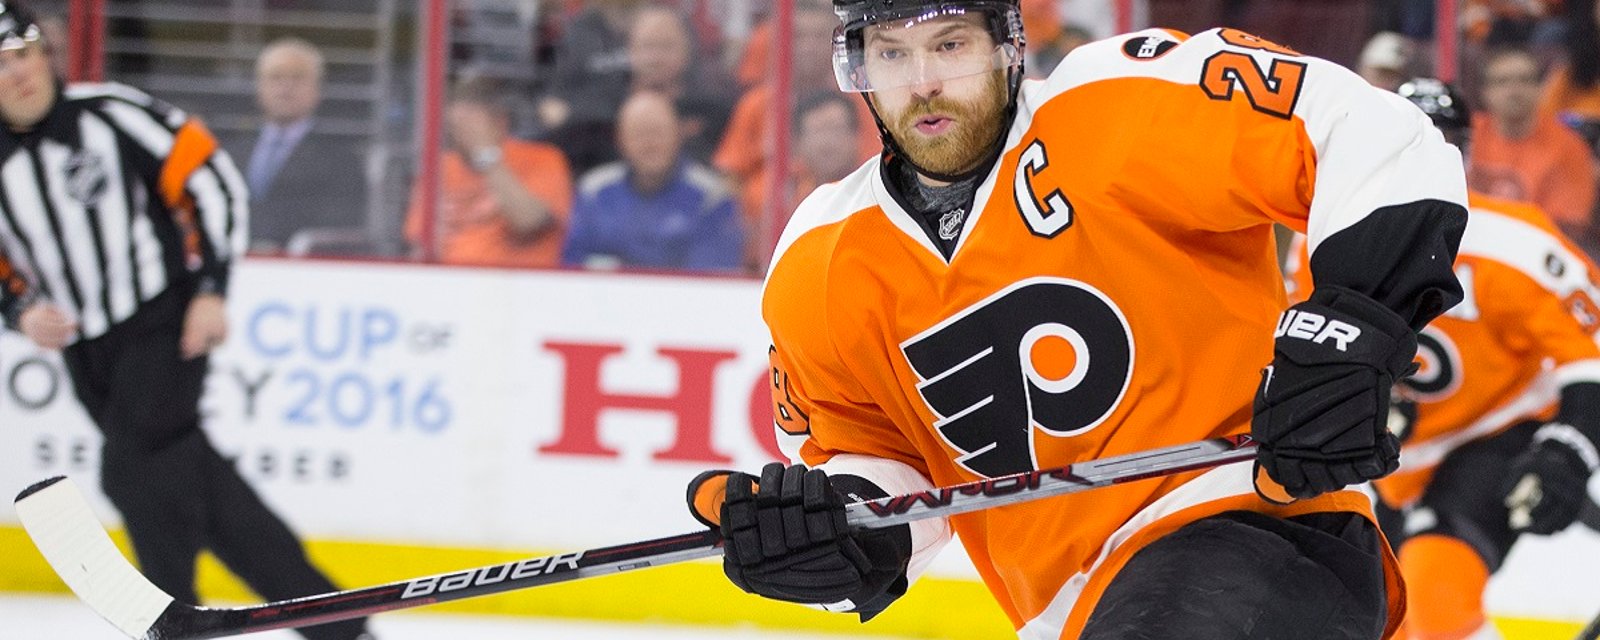 Breaking: Claude Giroux hurt by late hit after the play.